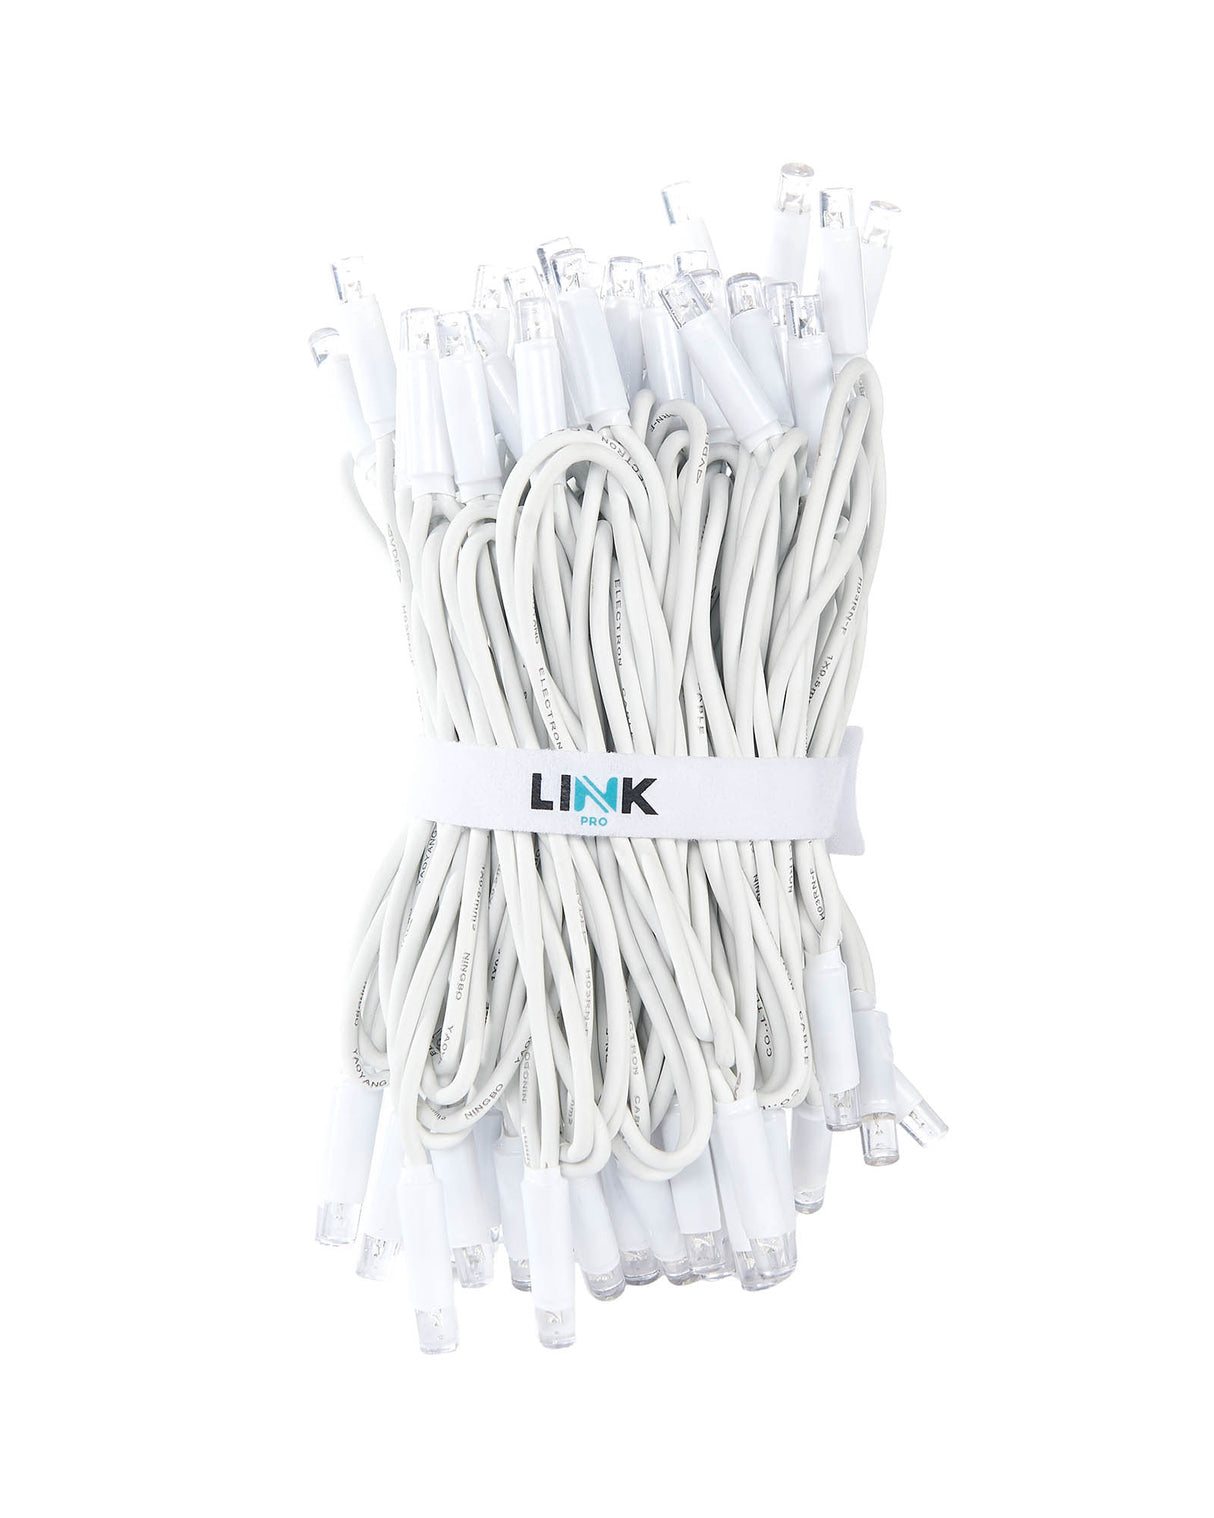 LINK PRO LED String Lights, White Cable, Warm White